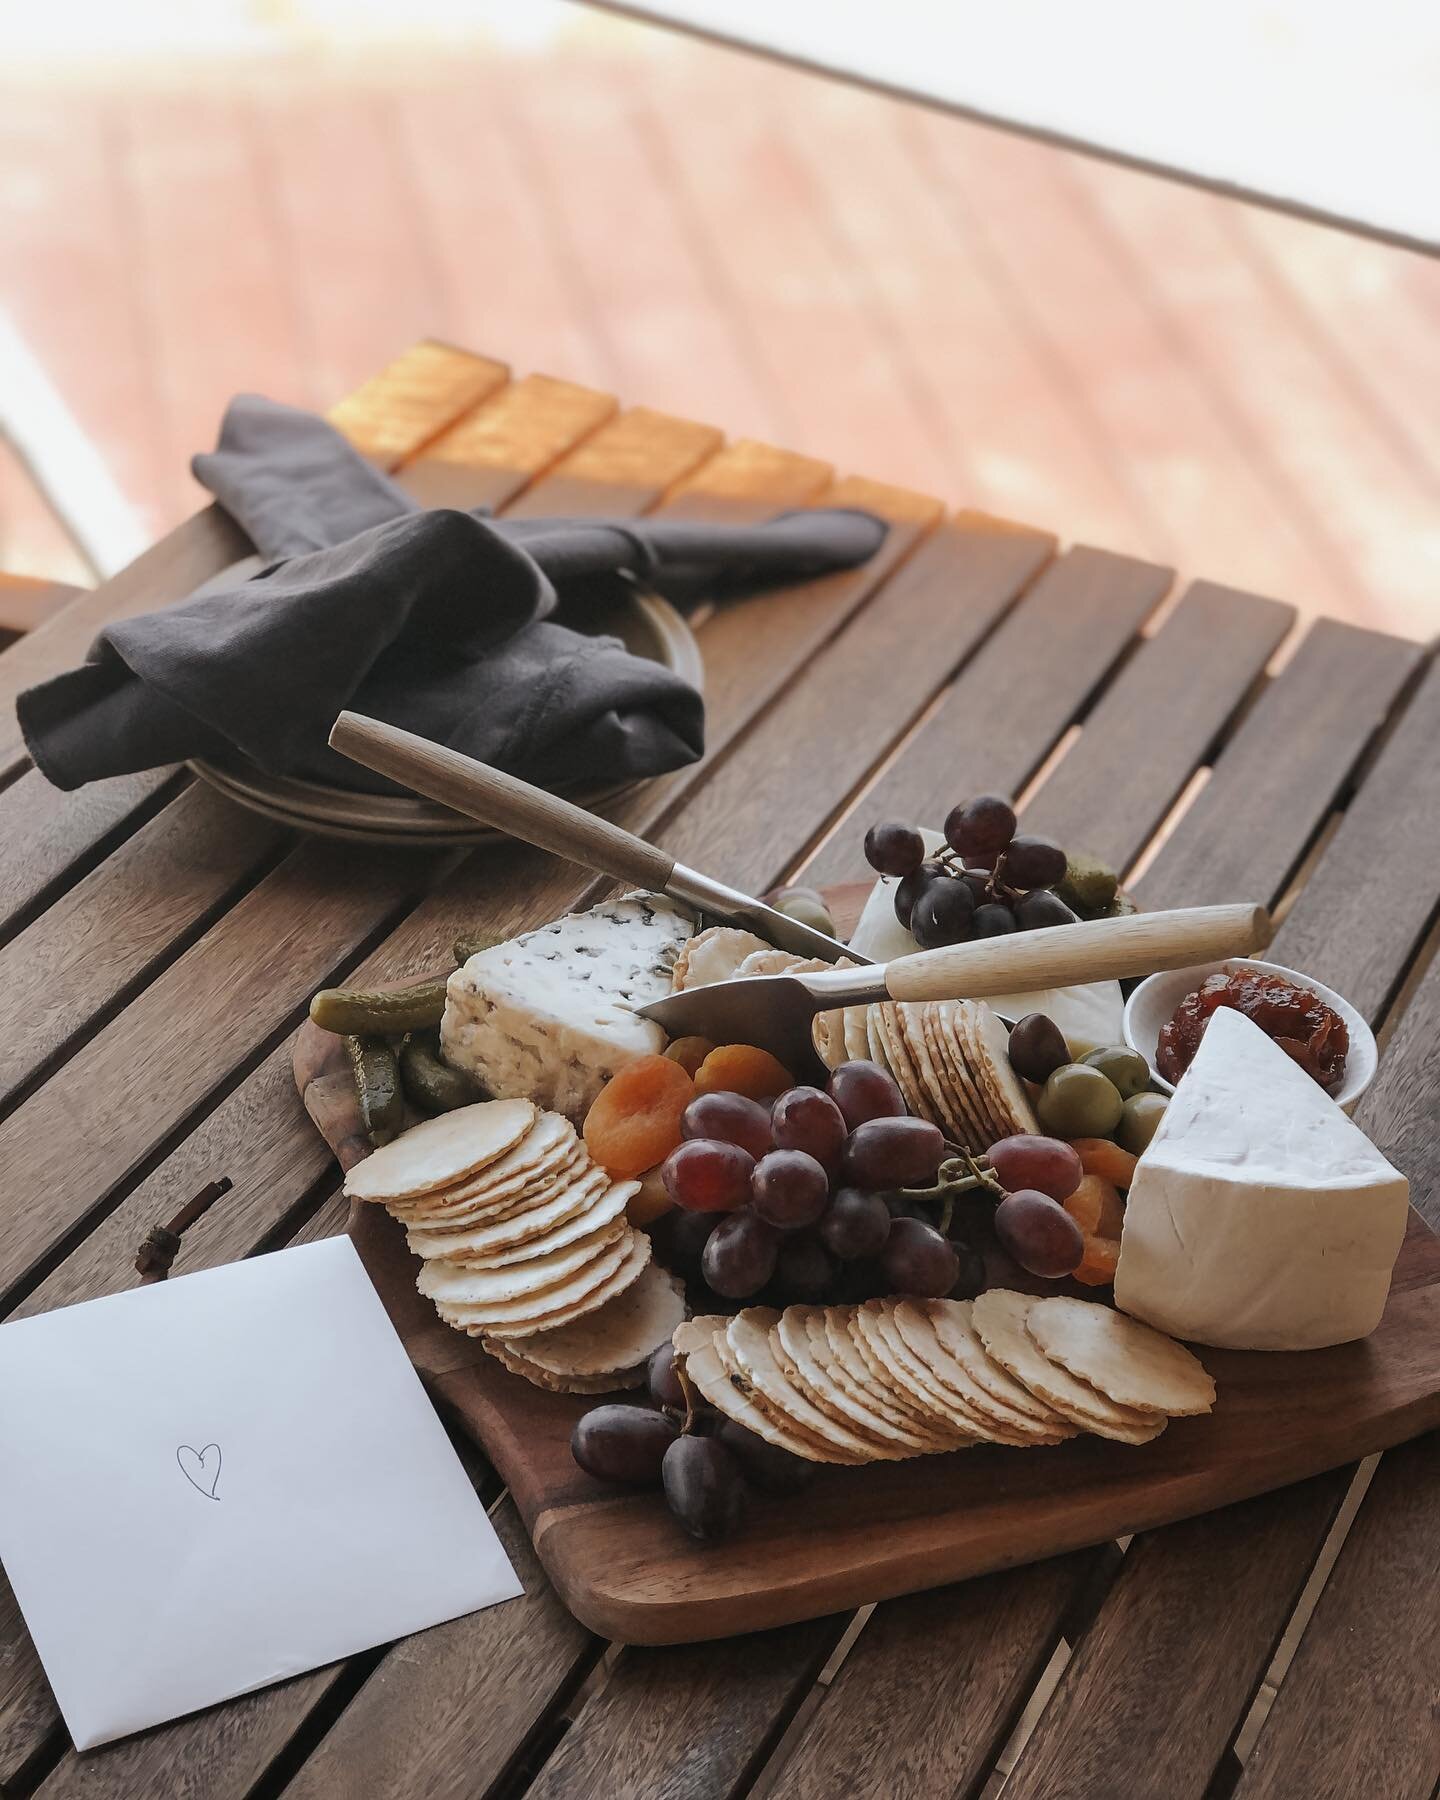 Cheeseboard on arrival? Don&rsquo;t mind if I do!! 

These are especially great when booking for friends and family, it&rsquo;s an extra surprise when then arrive and we can also add a card with a message from you. 

All produce is from the brilliant